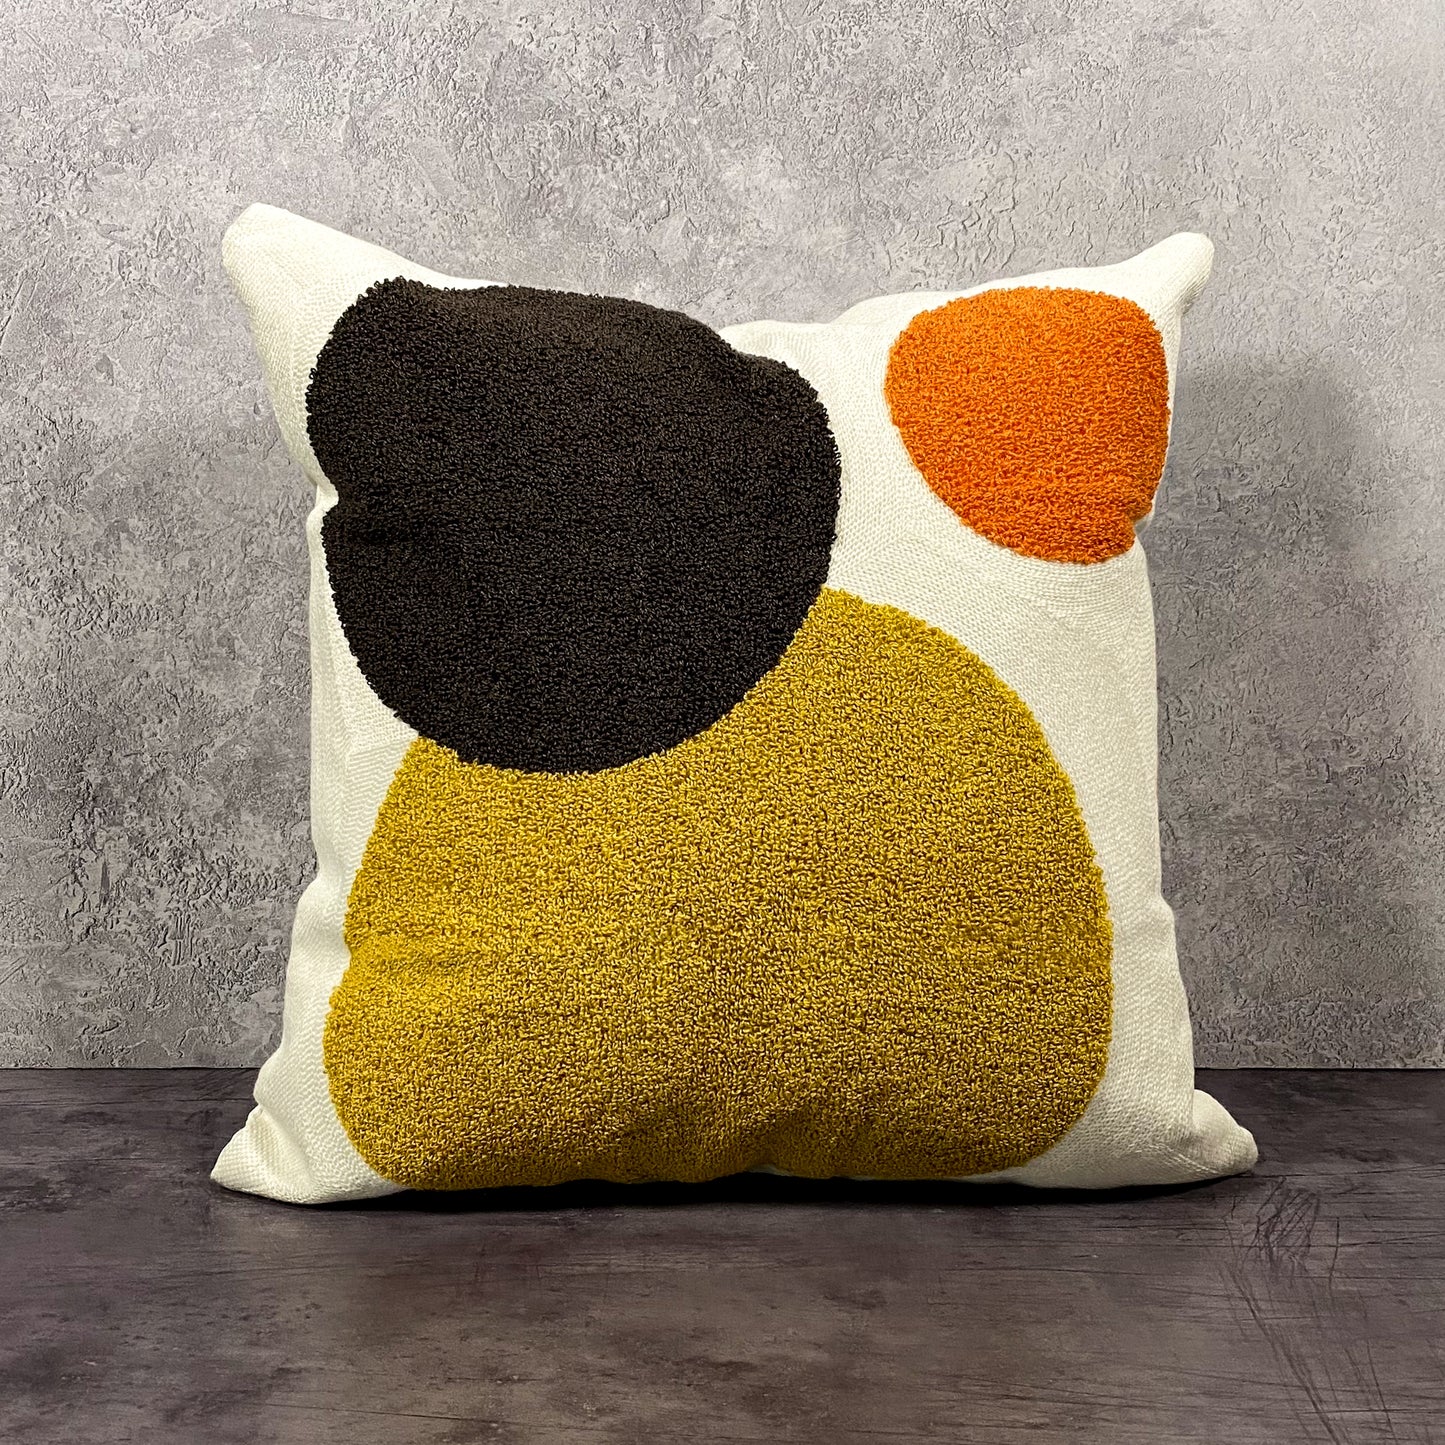 Abstract Pillow Cover - Black/Orange